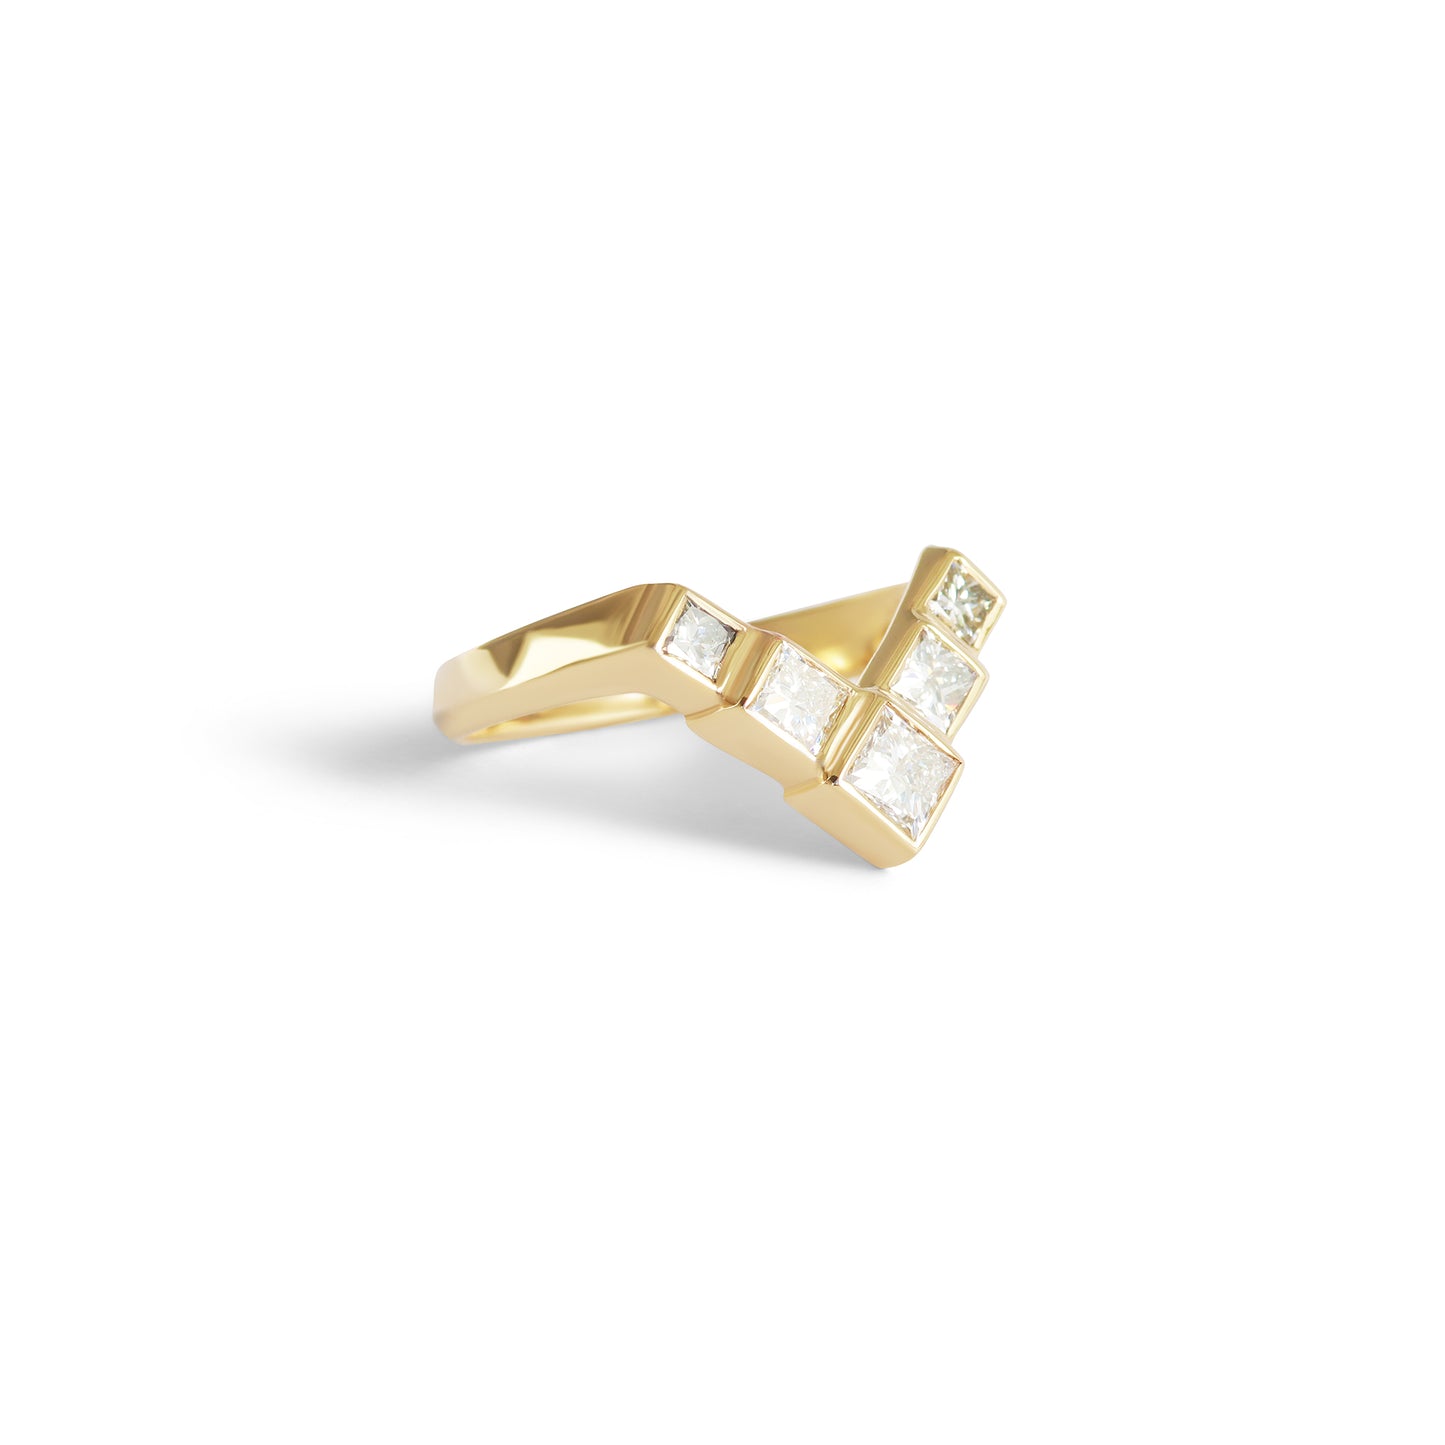 Load image into Gallery viewer, V Ring / Princess Cut Diamonds 0.83ct - Goldpoint Studio - Greenpoint, Brooklyn - Fine Jewelry
